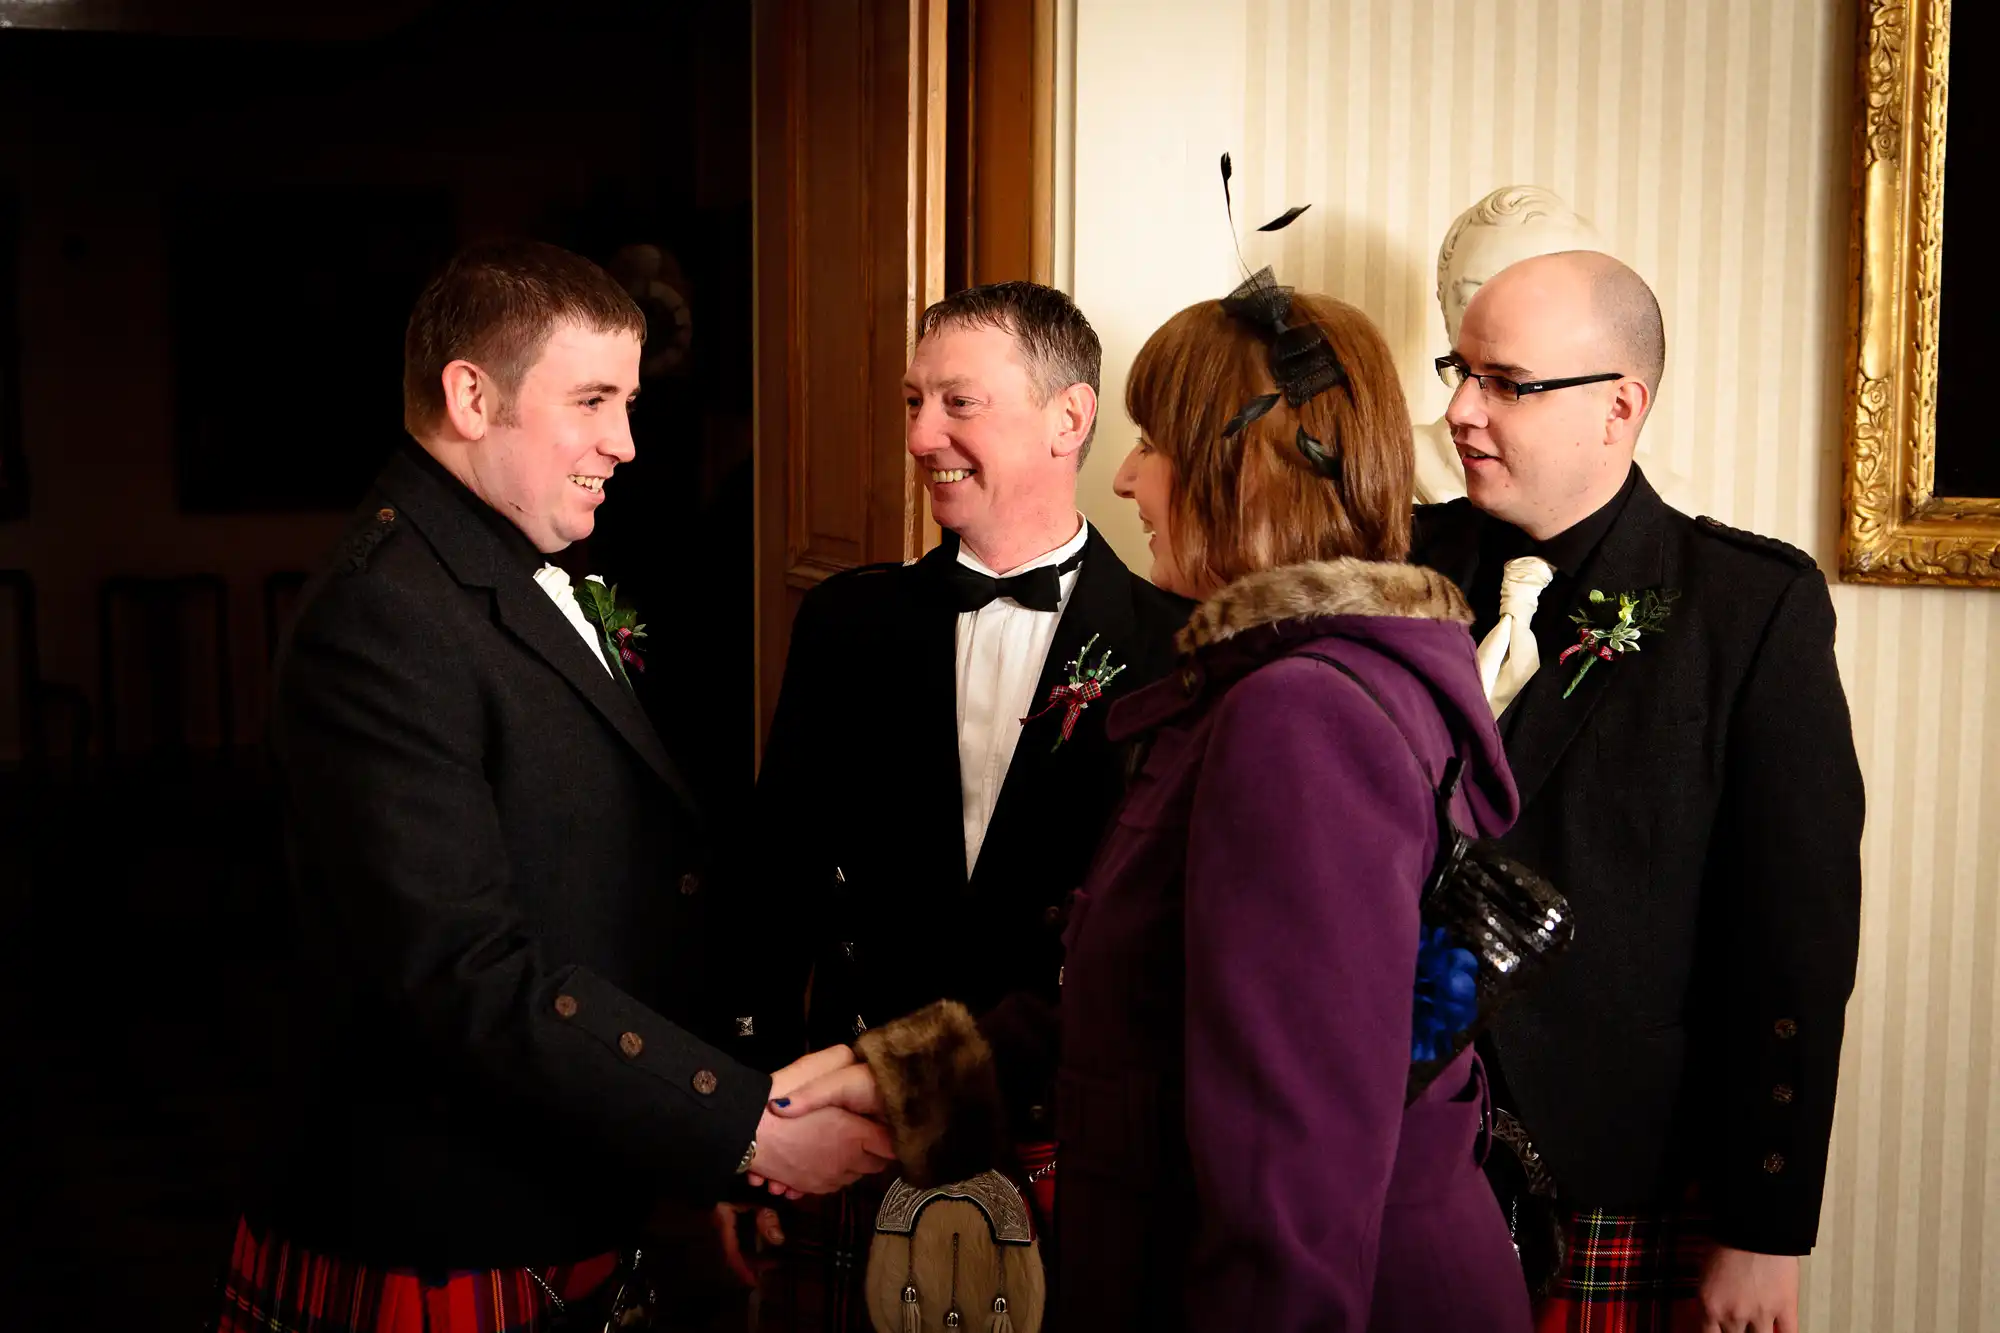 A group of four people, three in kilts, engaging in a friendly handshake and conversation at an indoor event.